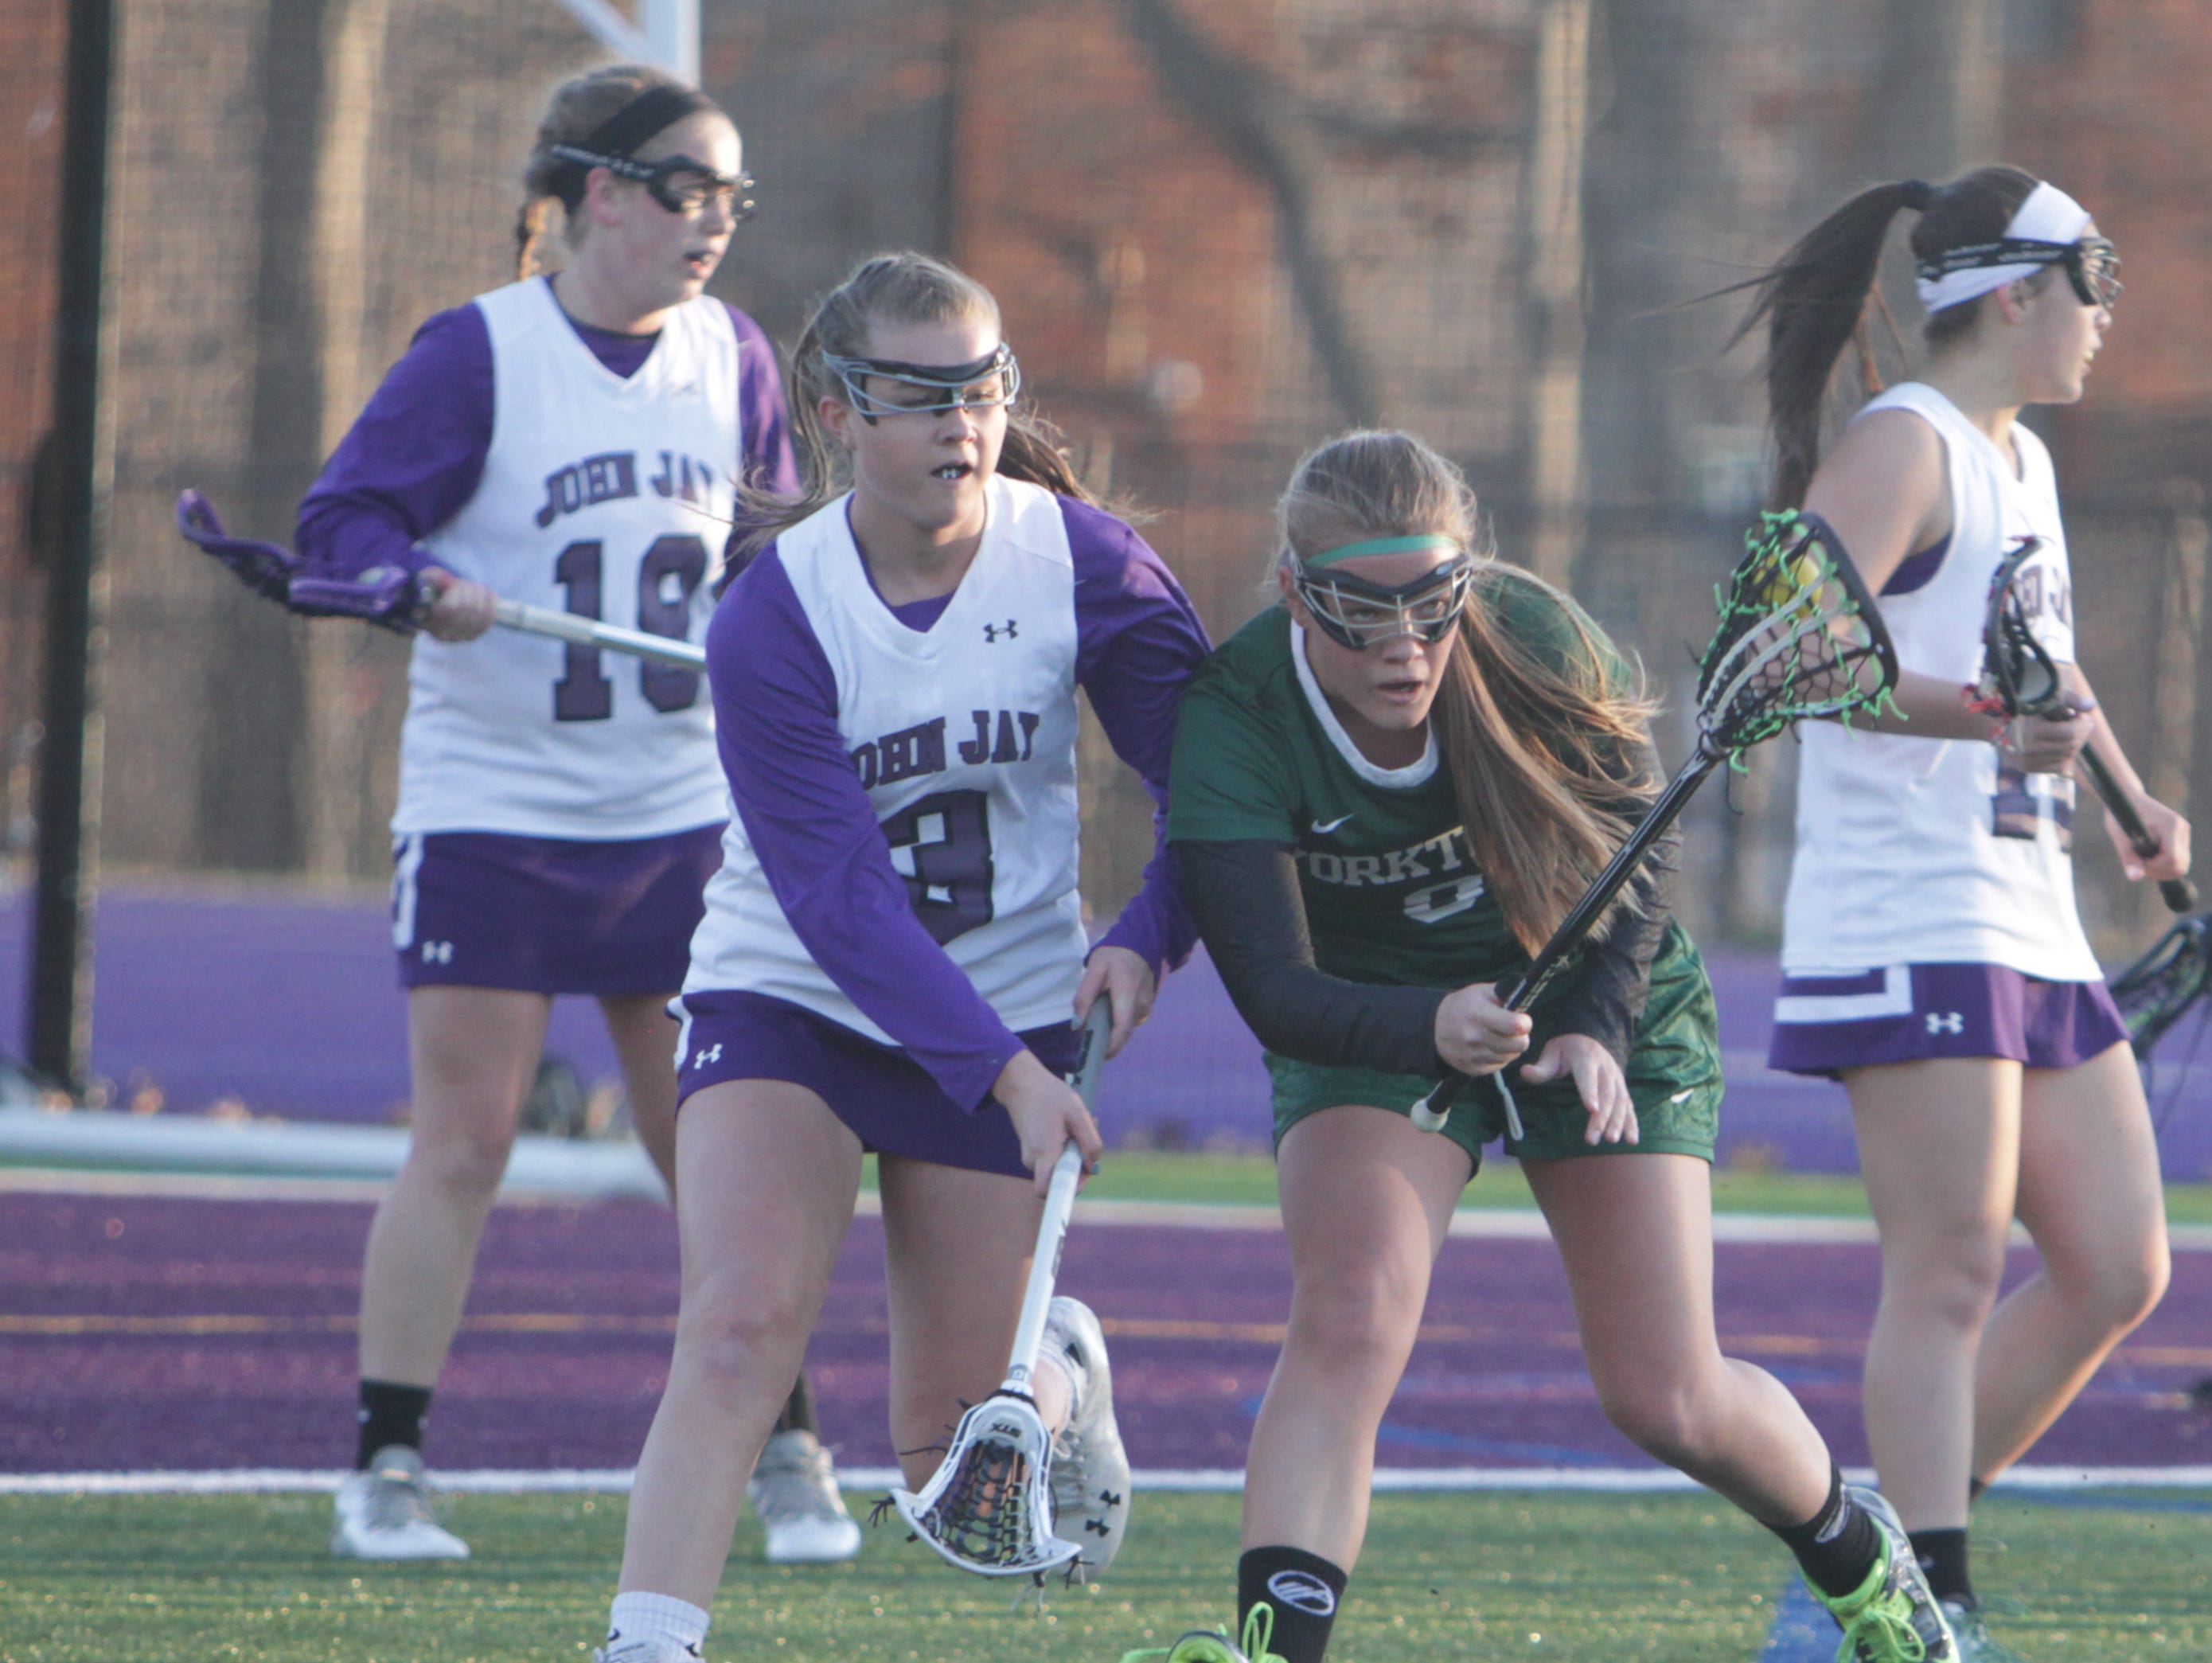 Game action during a Section 1 girls lacrosse game between John Jay and Yorktown at John Jay-Cross River High School on Tuesday, March 29th, 2016. Yorktown won 15-5.